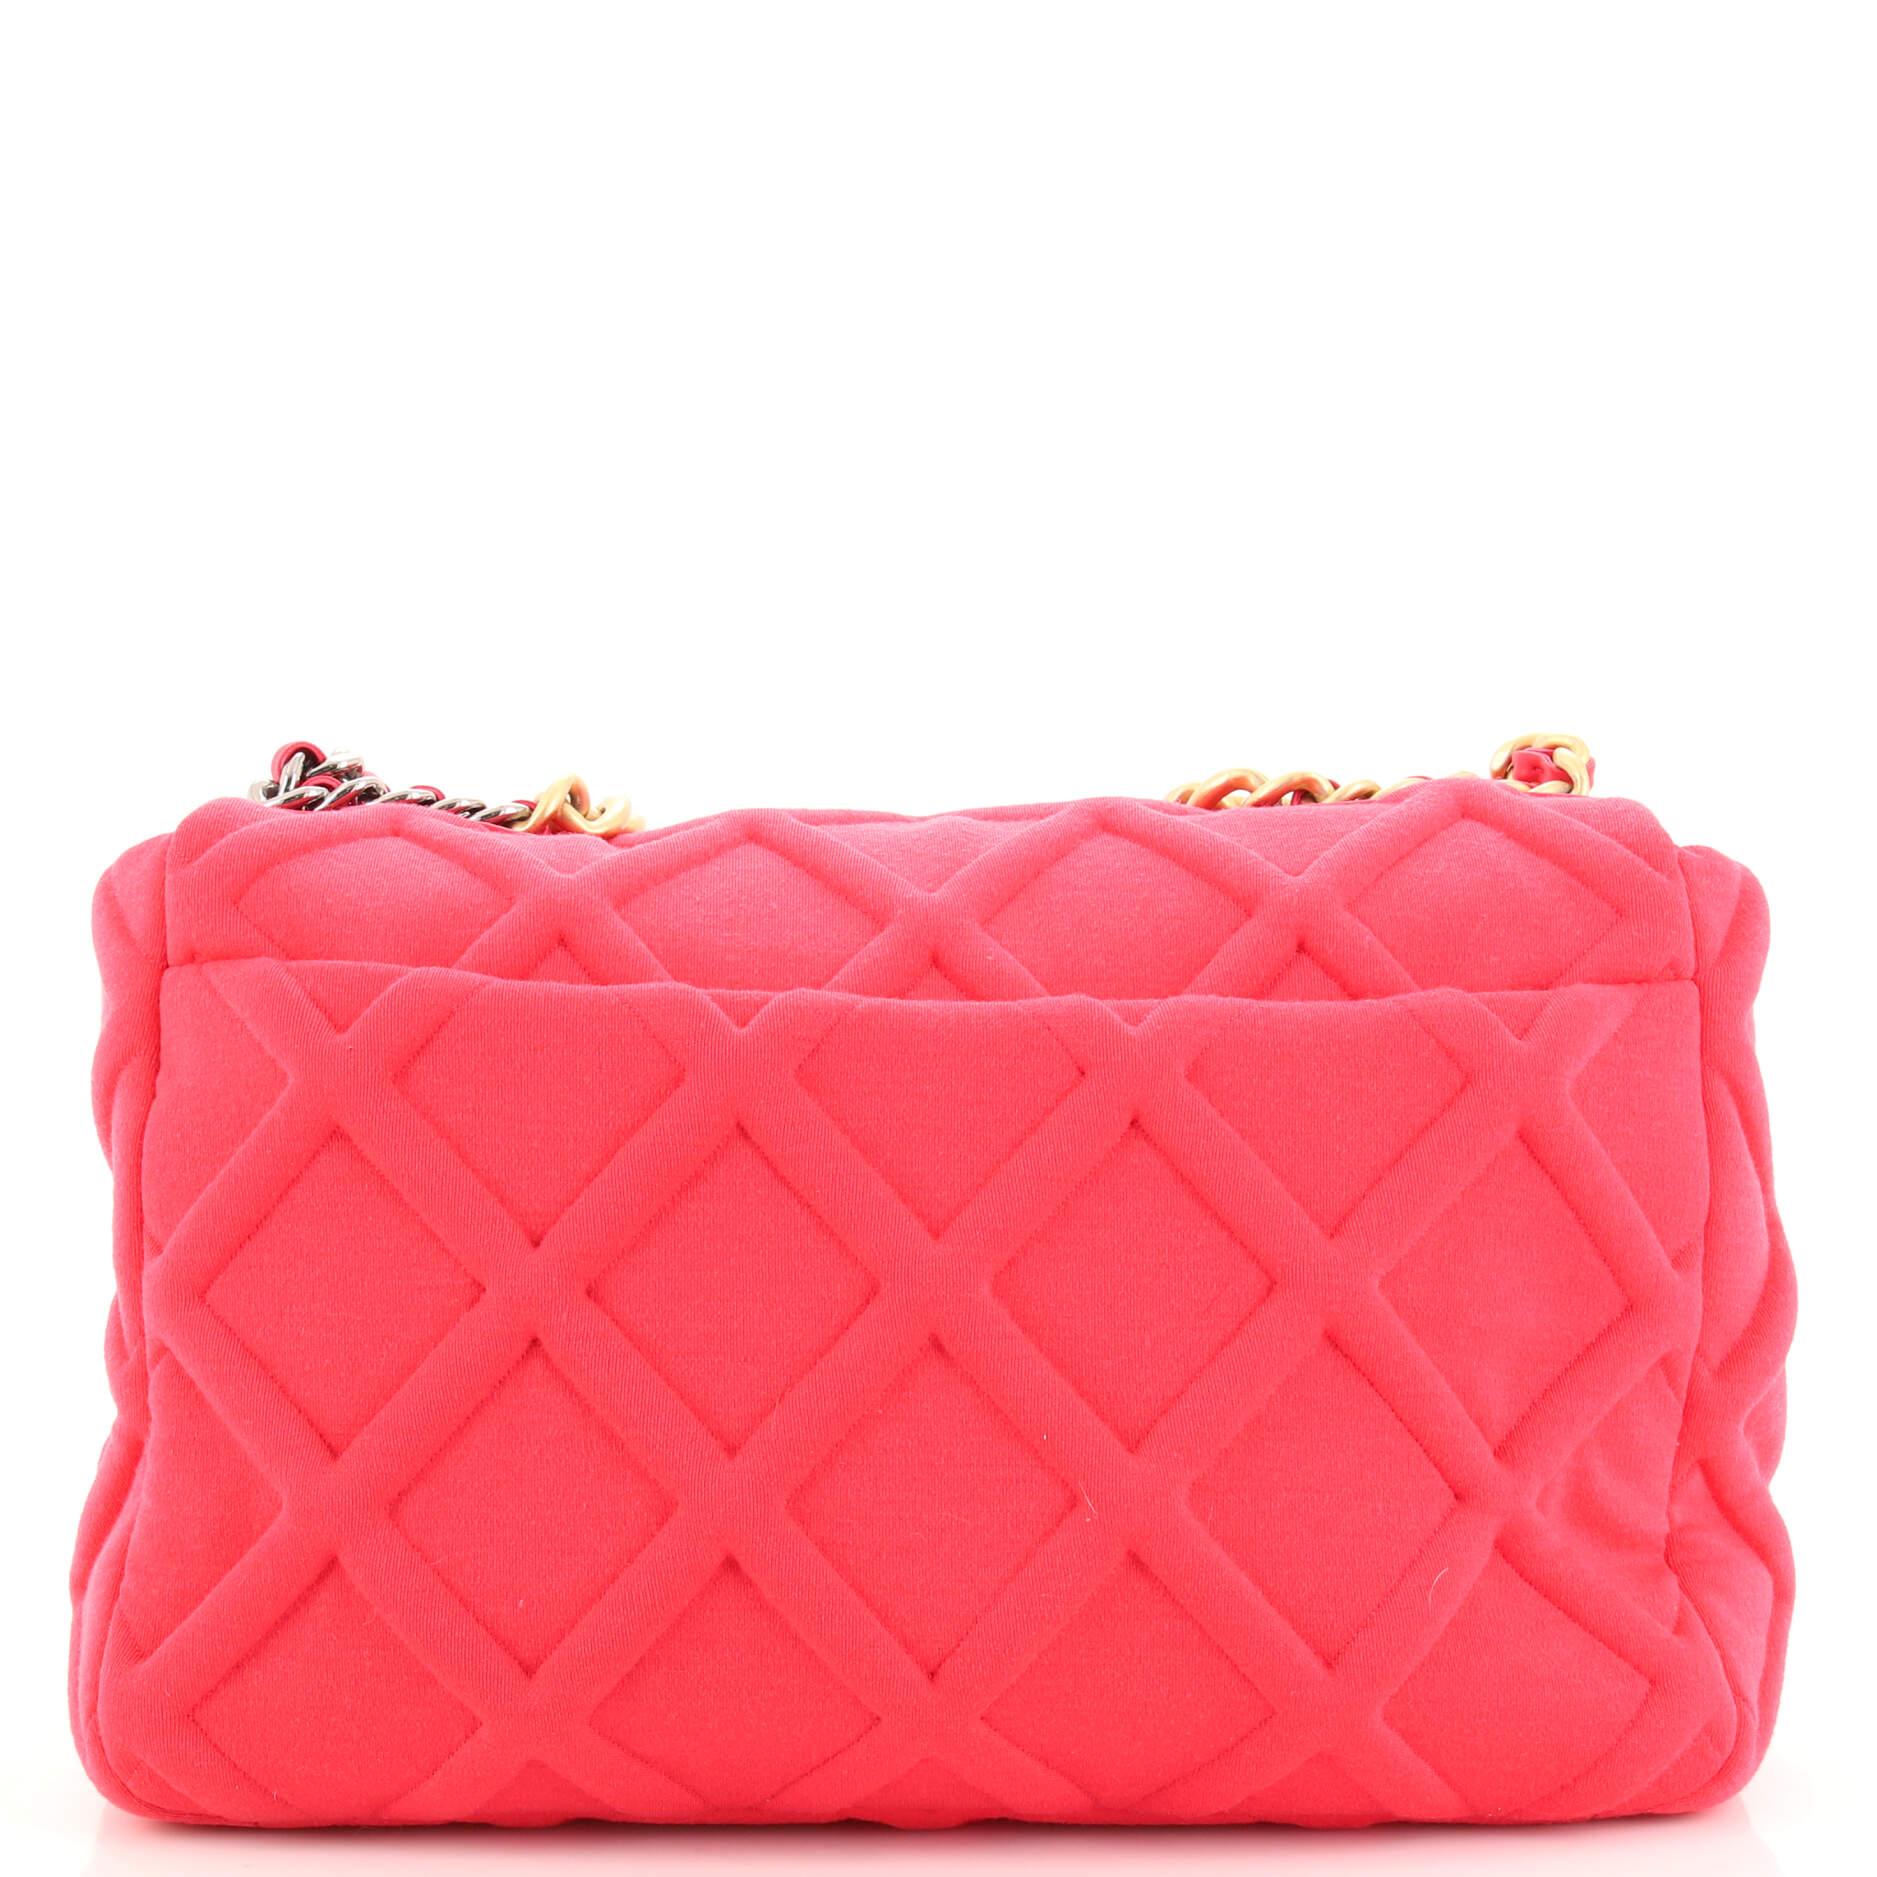 Chanel 19 Flap Bag Quilted Jersey Maxi In Good Condition For Sale In NY, NY